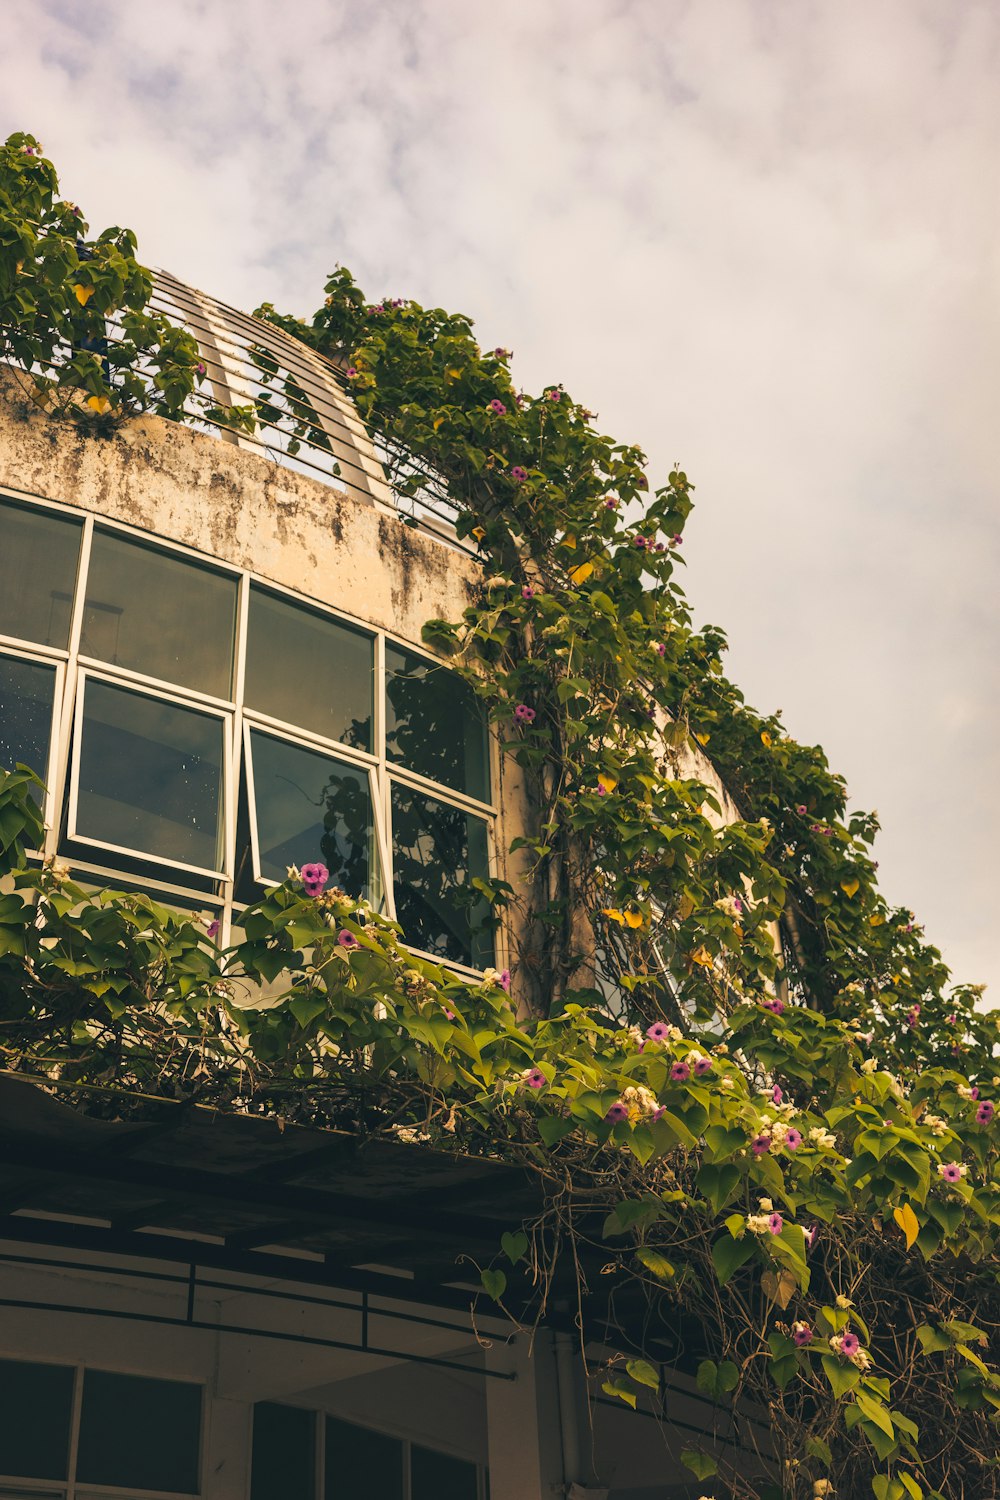 a building covered in vines and flowers under a cloudy sky